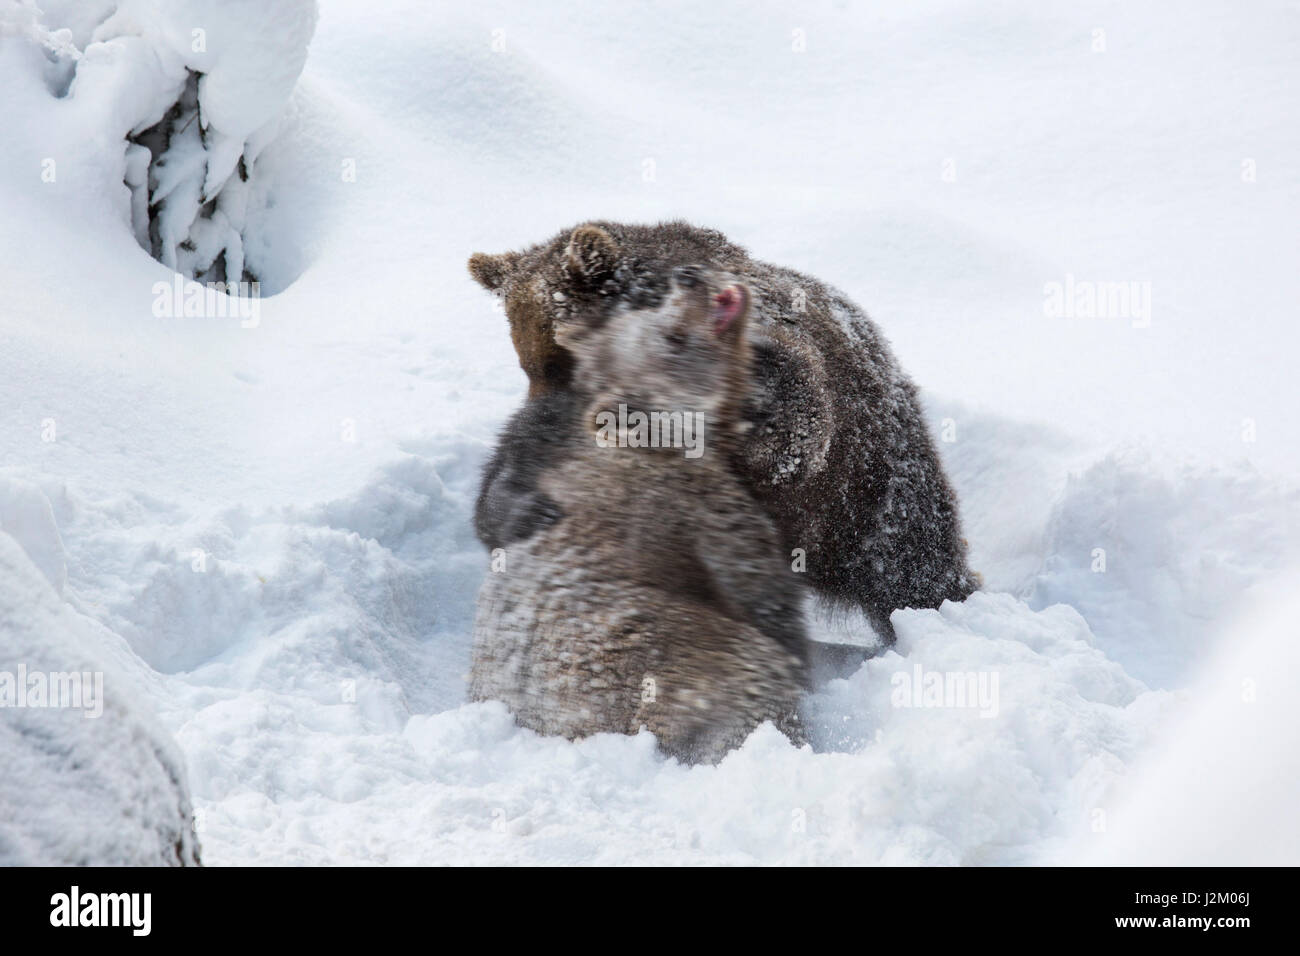 Two 1-year-old brown bear cubs (Ursus arctos arctos) play fighting in the snow in winter Stock Photo